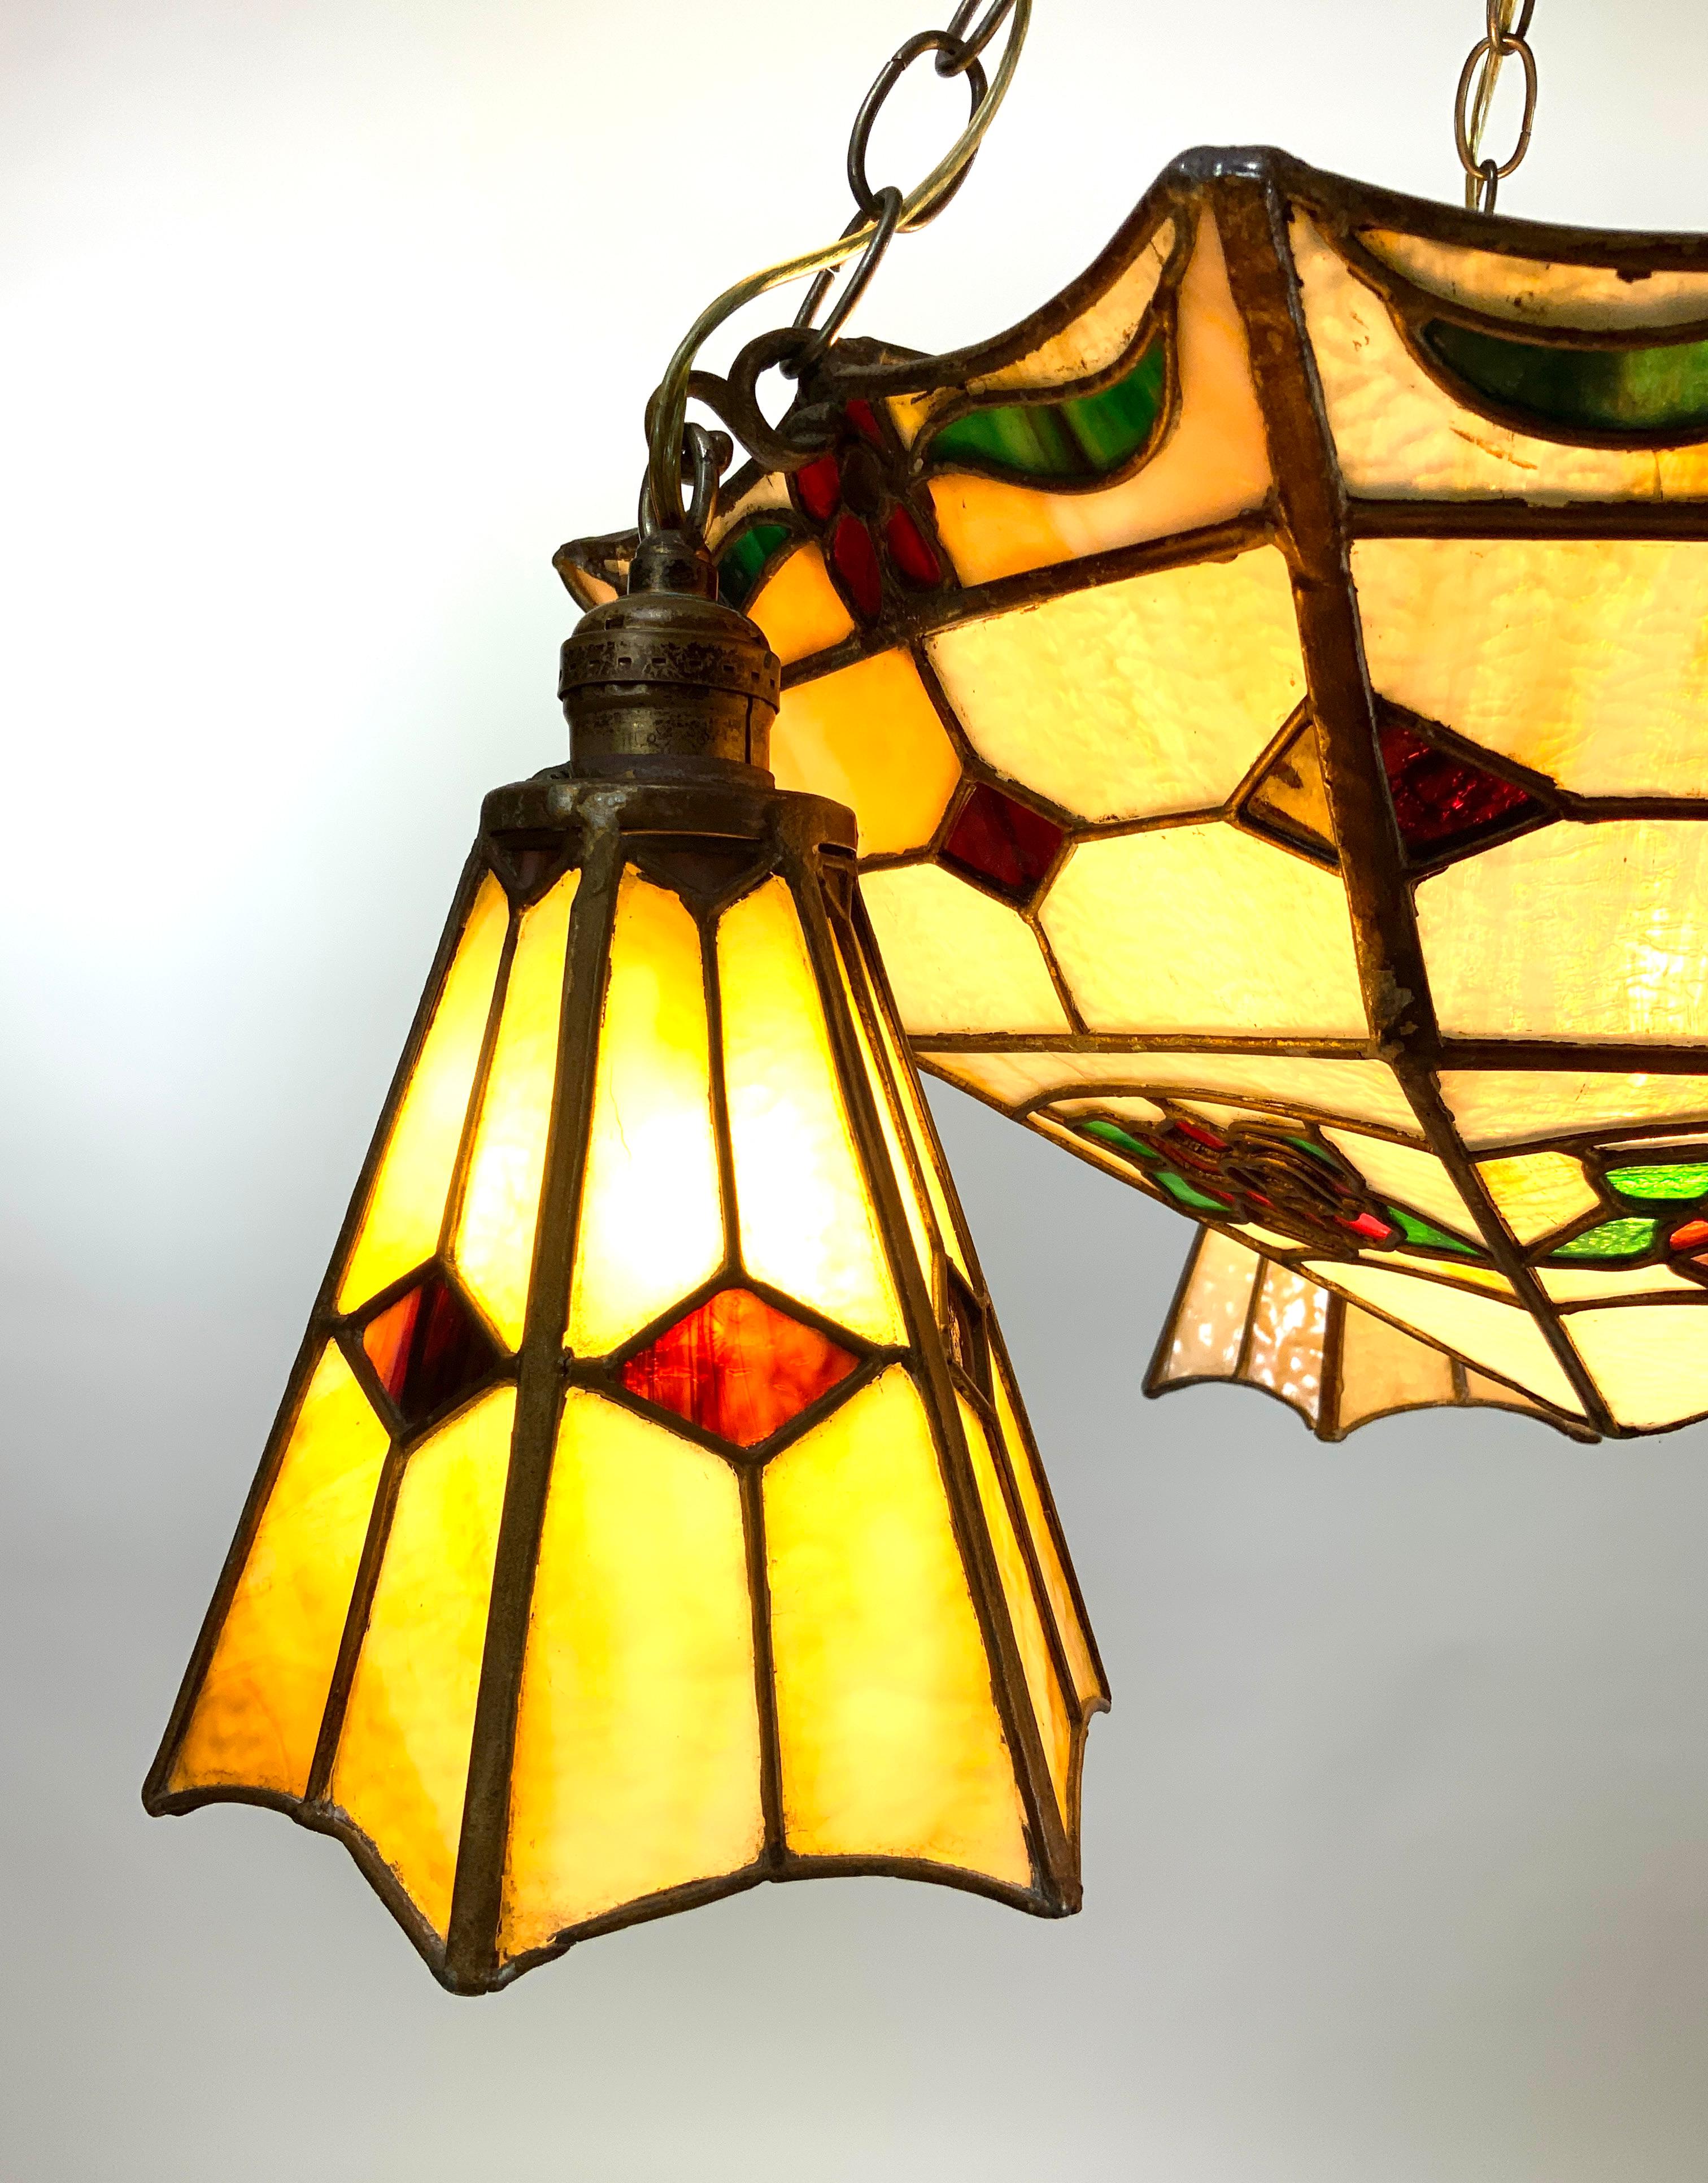 This stunning stained glass Art Nouveau pendant faceted chandelier is in excellent condition. No chips, cracks or visible damage. It has been tested and is working perfectly.

The colours of the stained glass are clear and vibrant. There are 2 roses